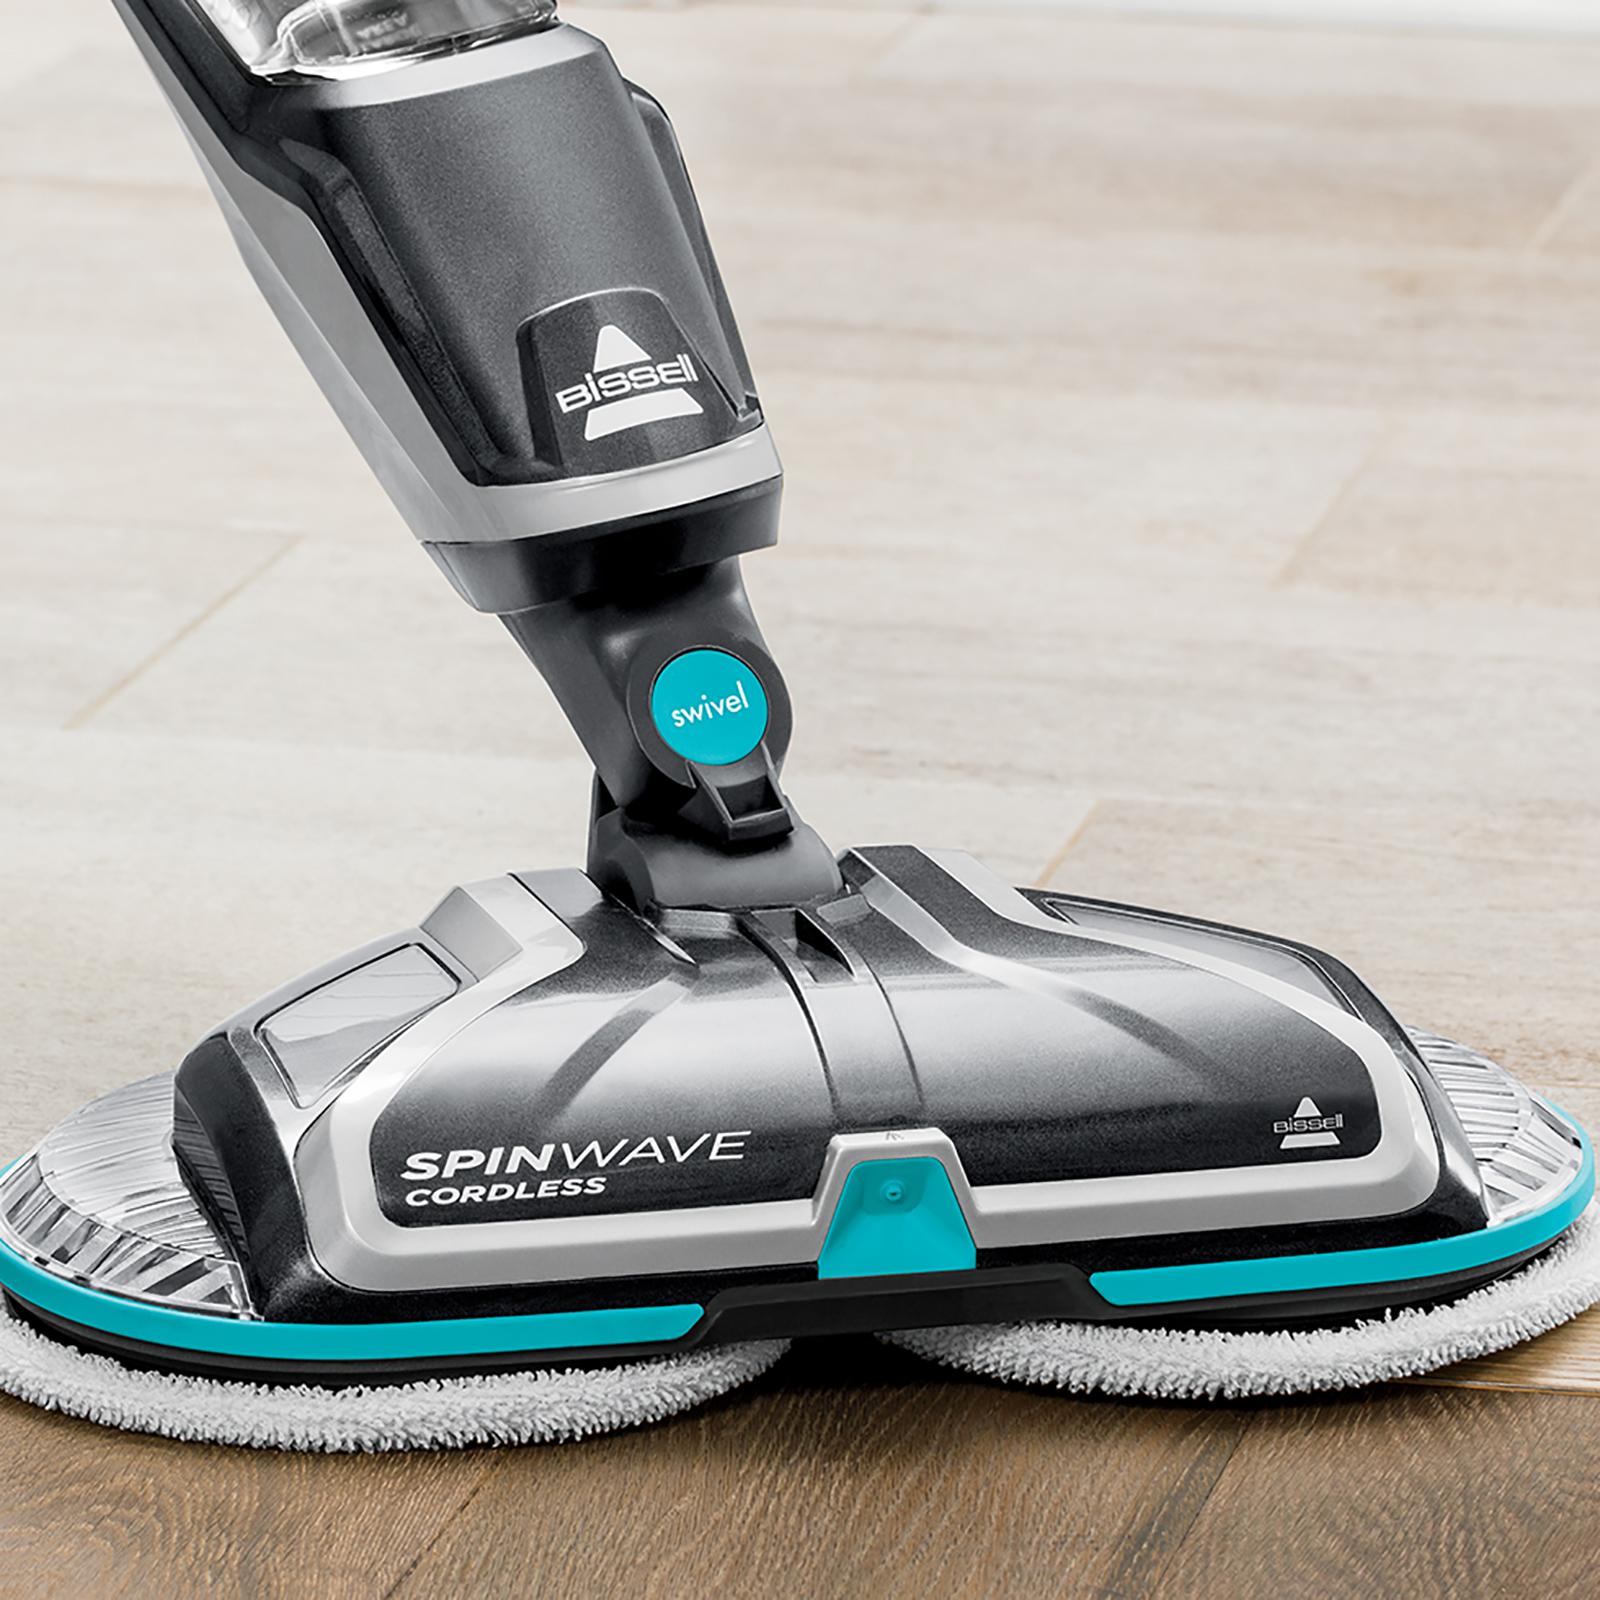 Bissell Spinwave Plus Power Mop